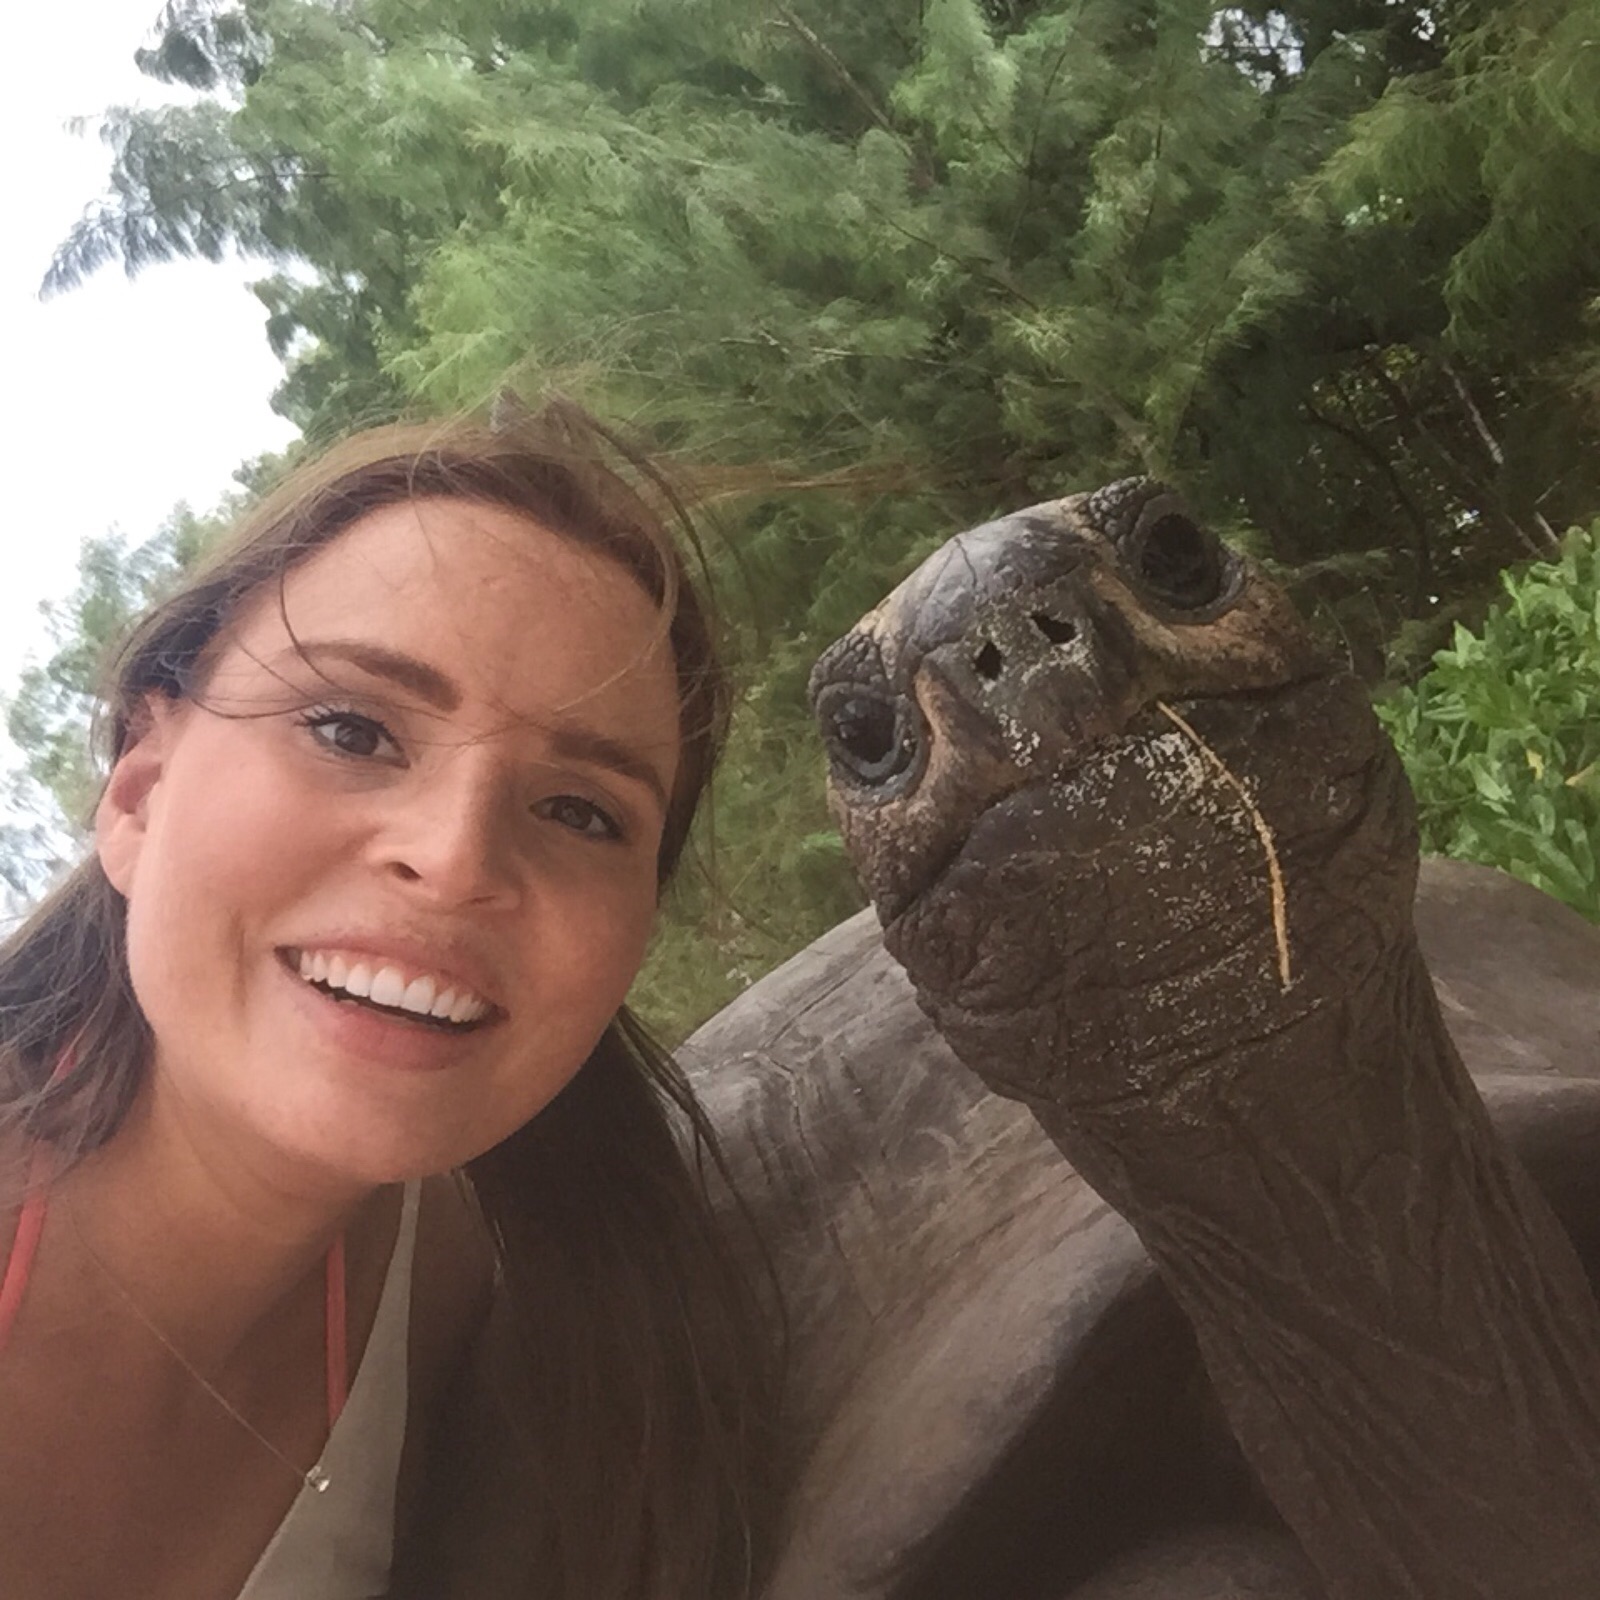 selfie with turtle